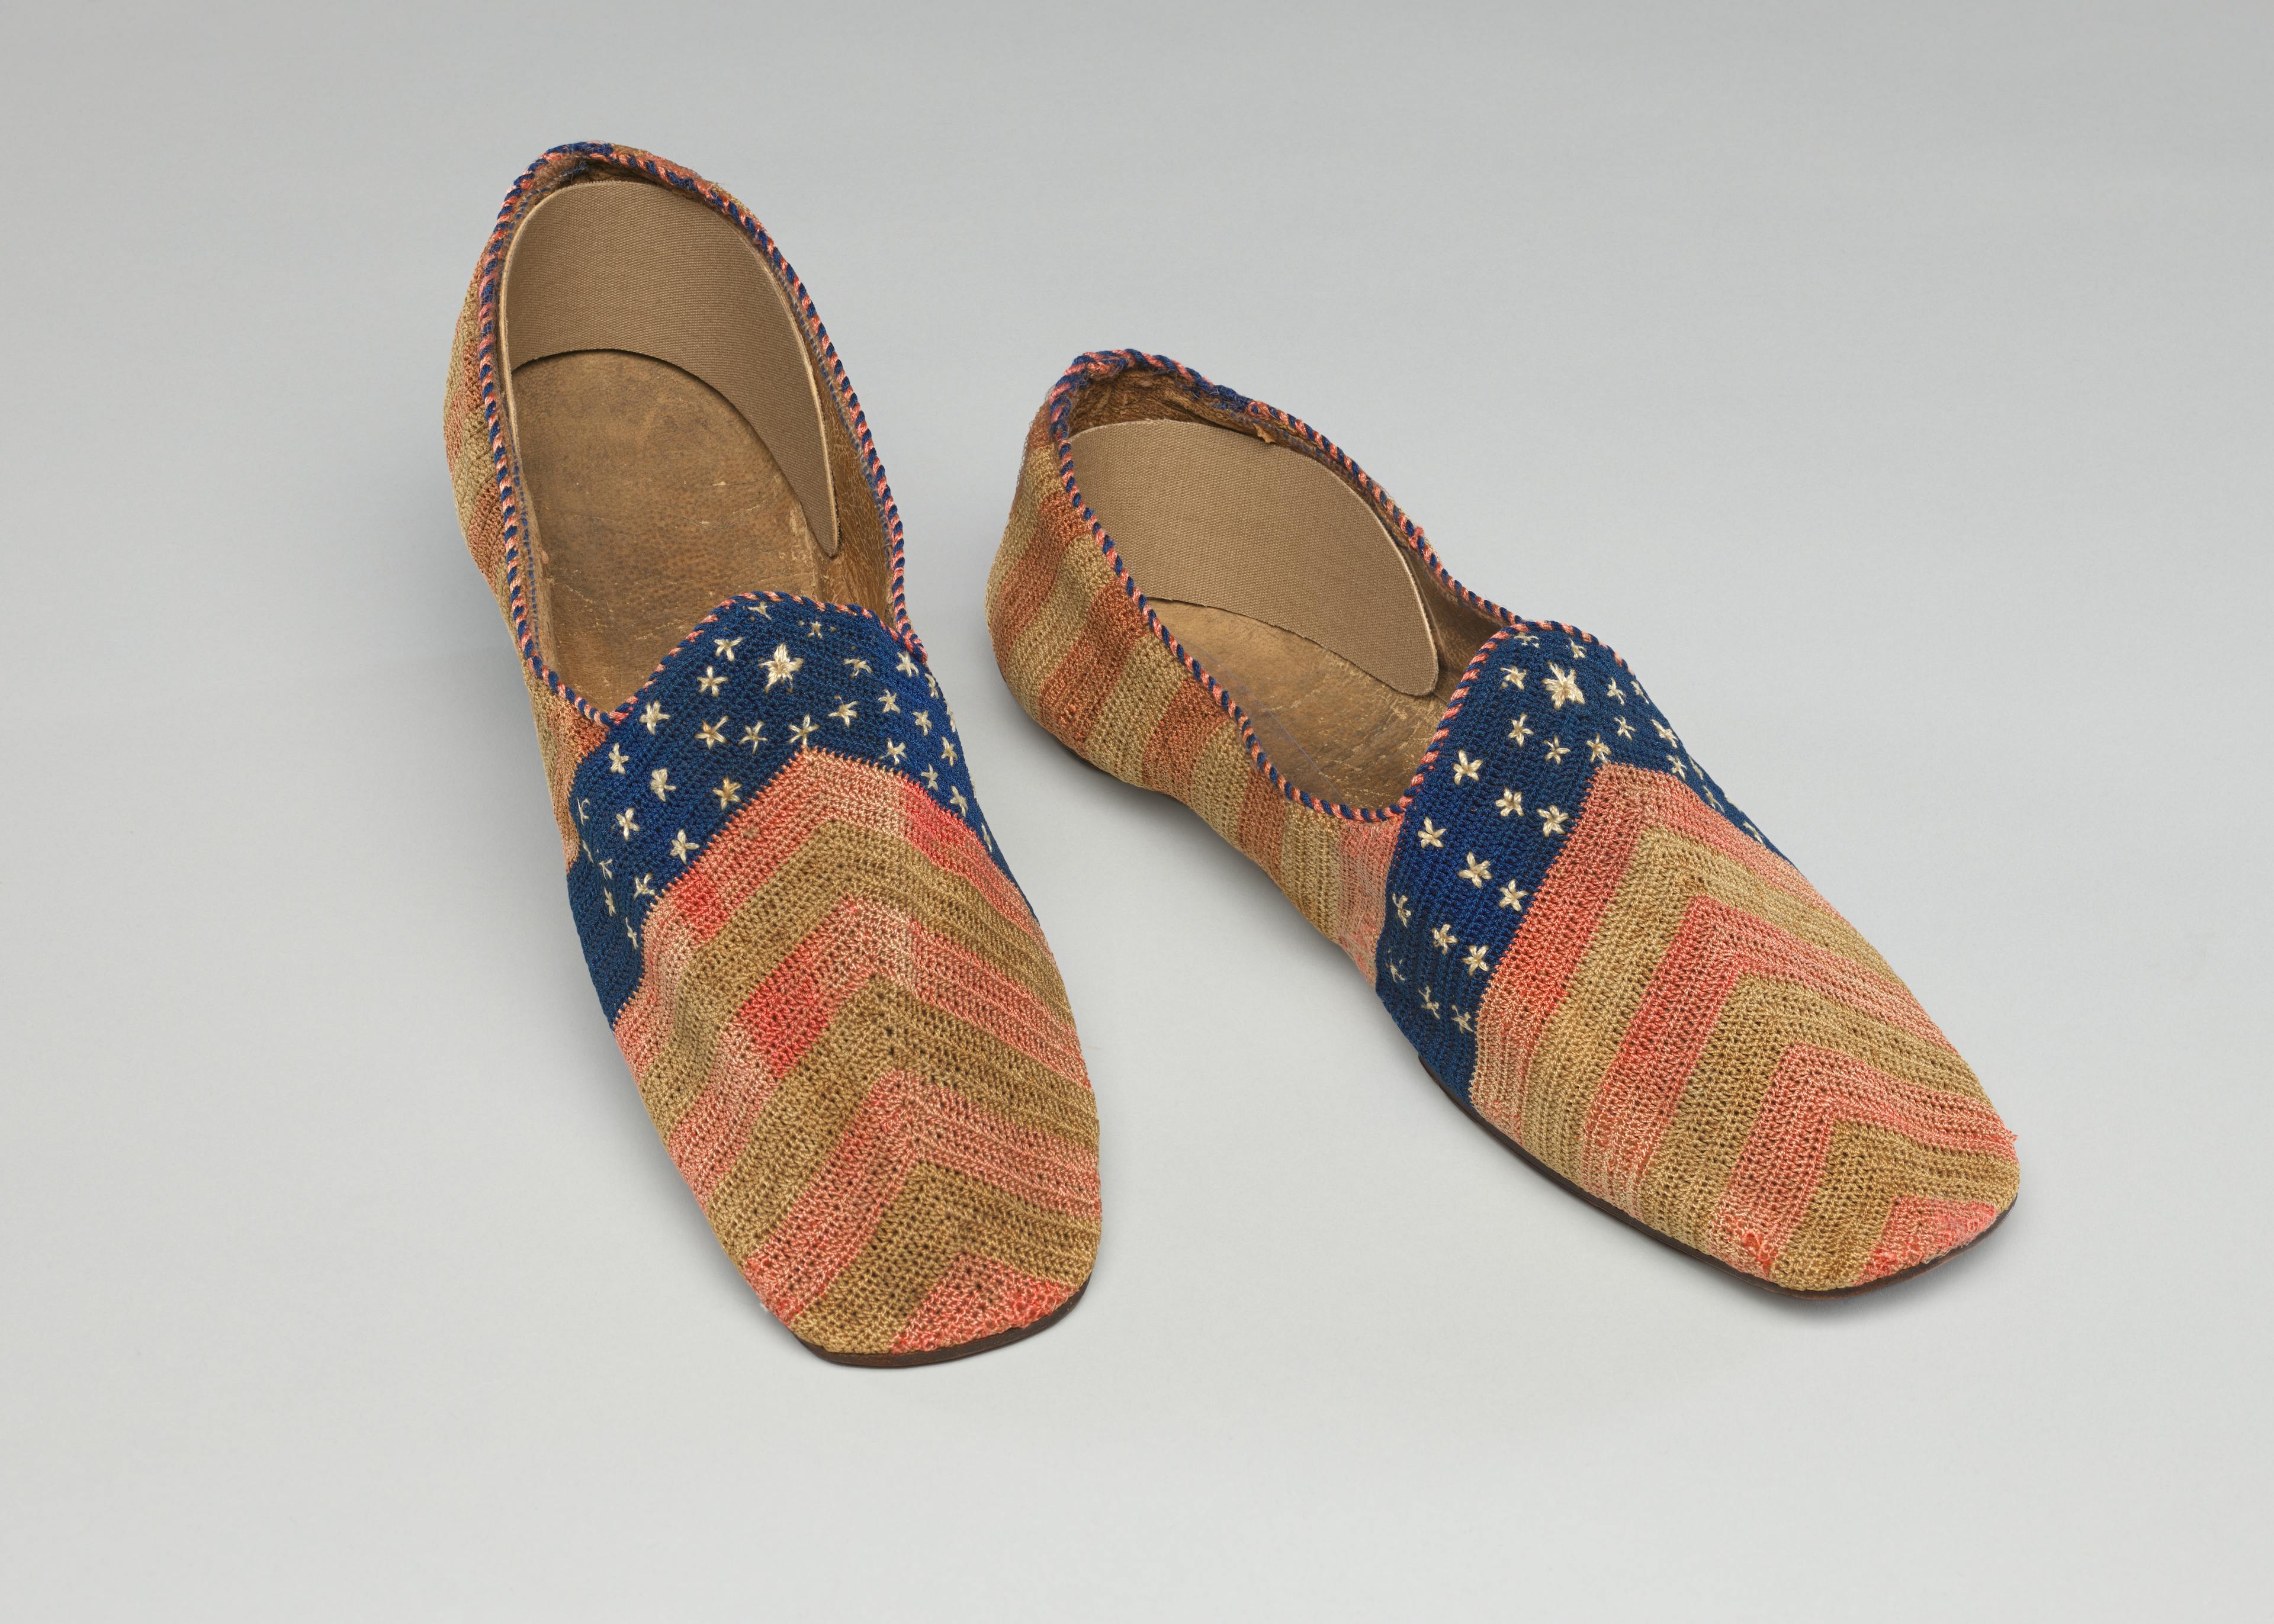 A pair of men's slippers in a stars and stripes design with a flat, leather sole and a squarish toe. The slippers are crocheted in stripes of red and white from the toe to the heel and across the top of the vamp is a blue band embroidered with scattered white stars.